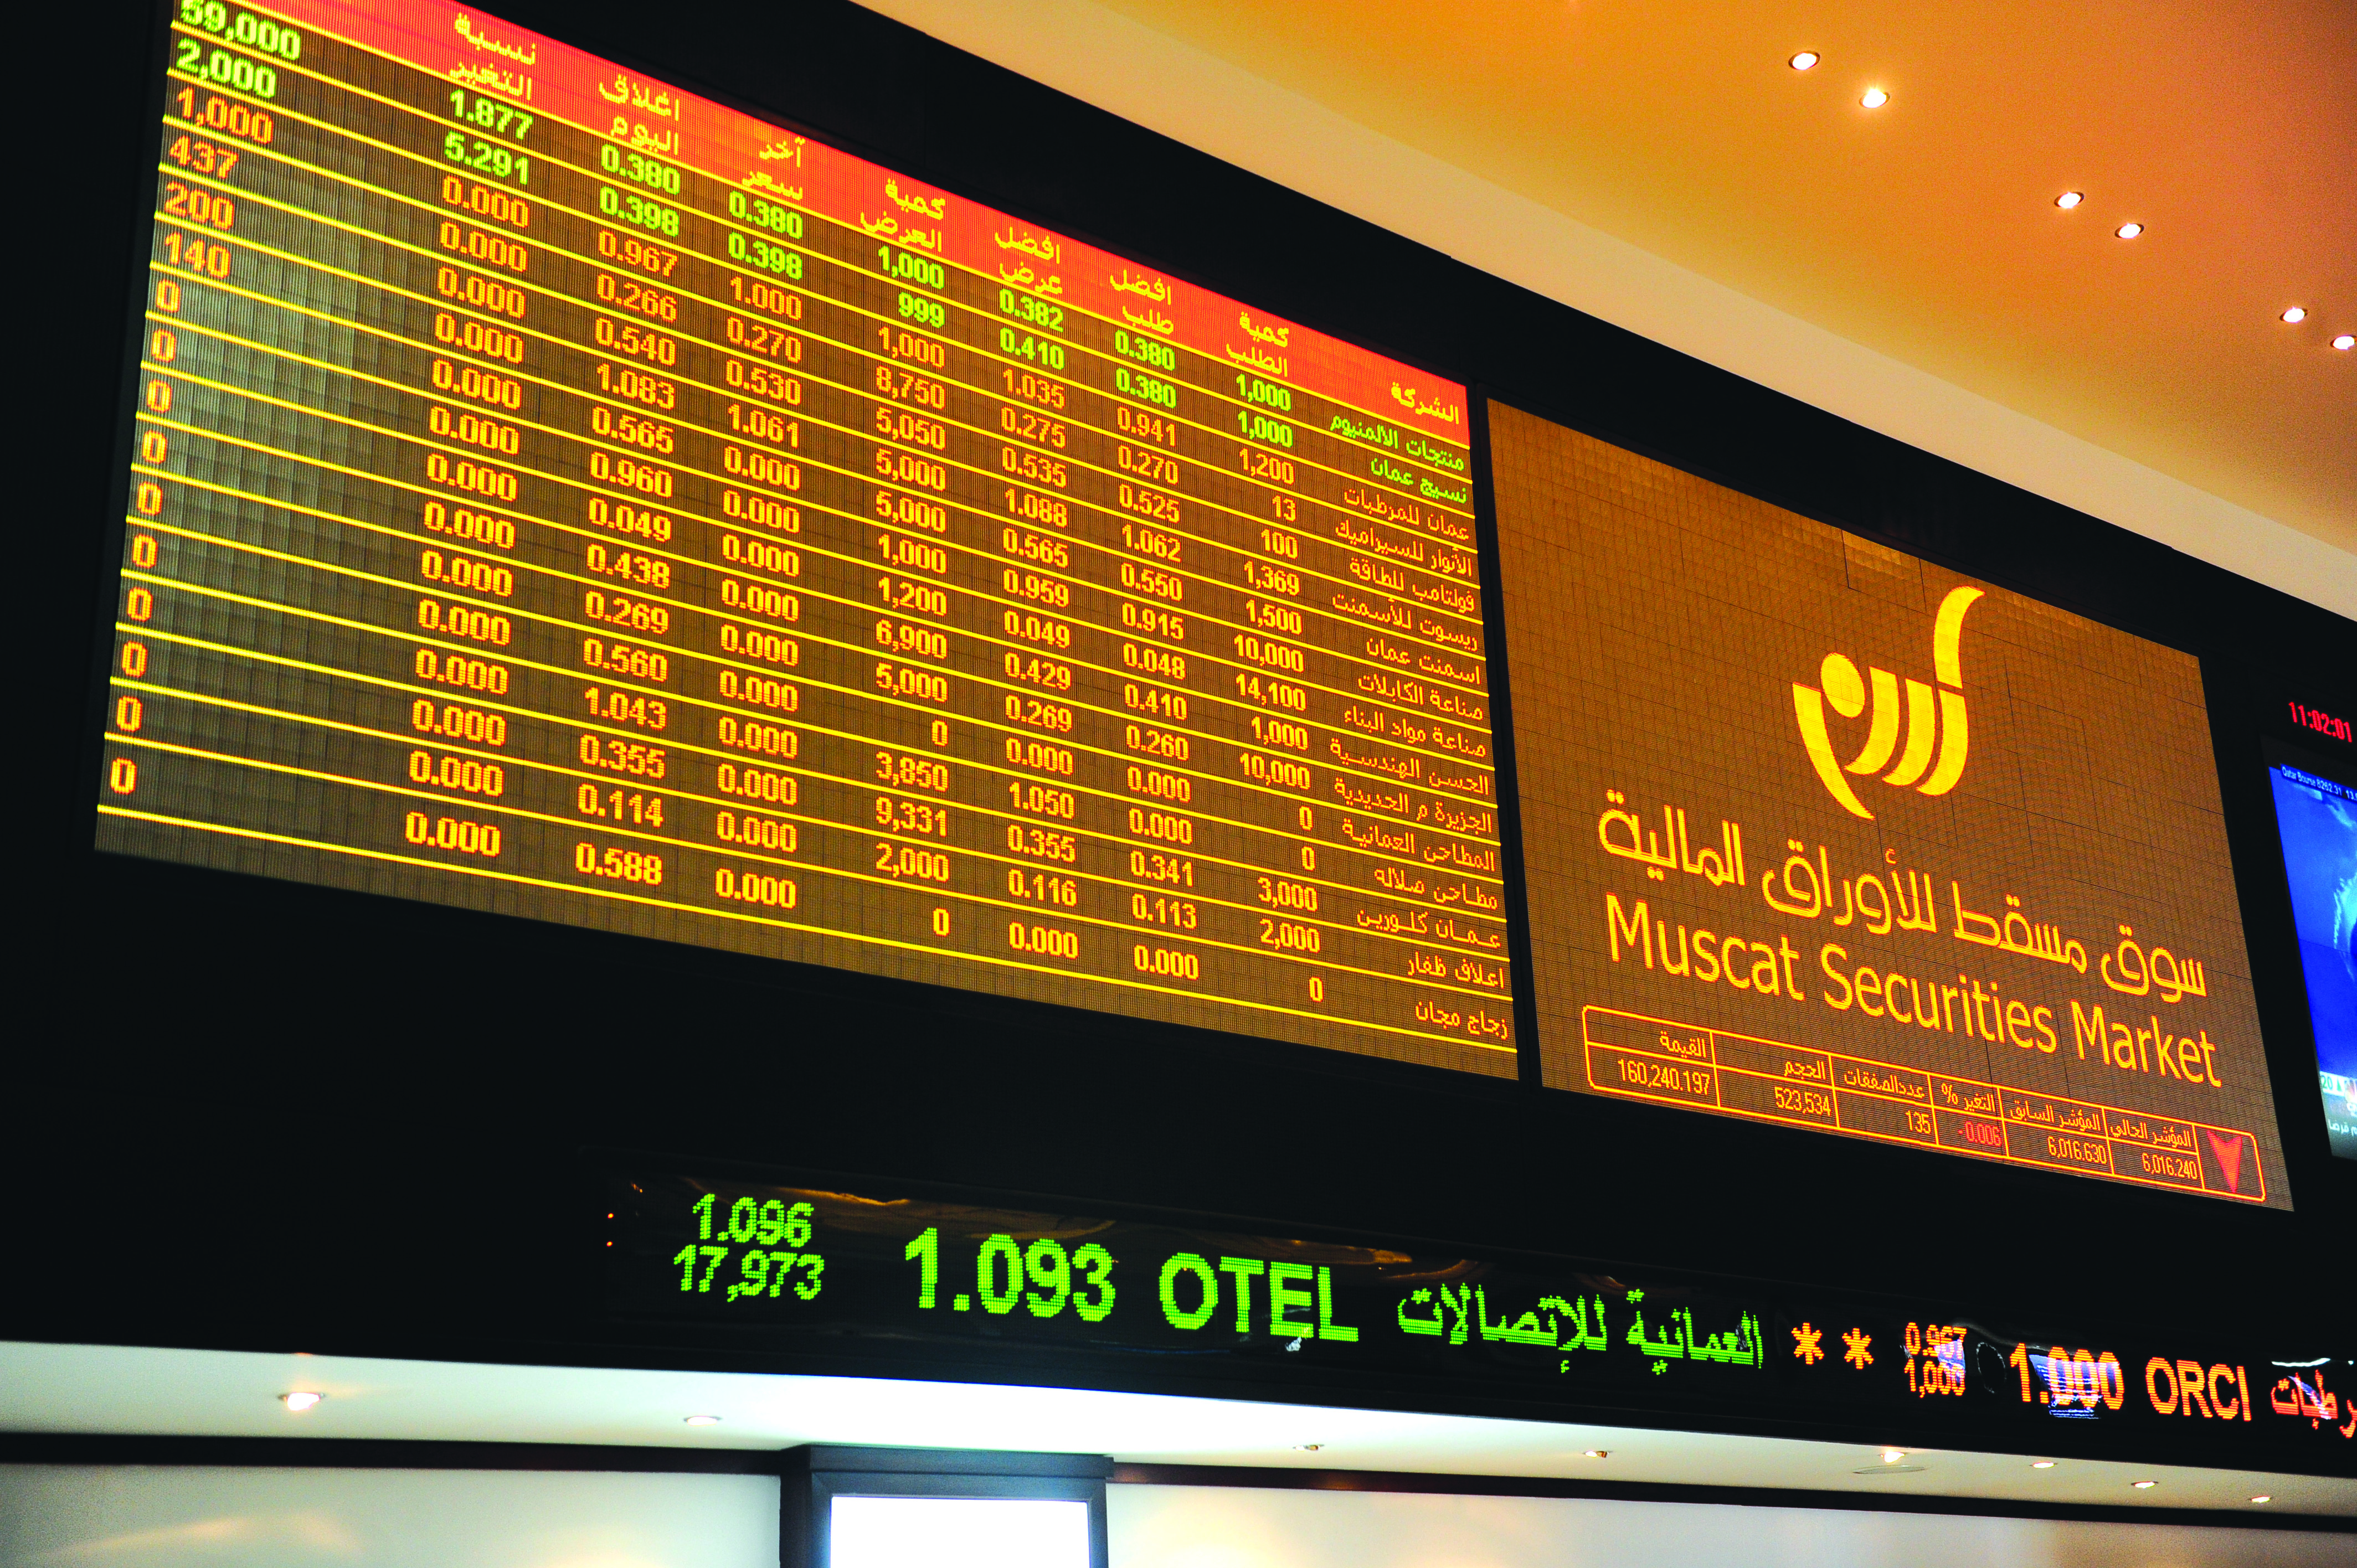 Oman's banks, telecom service providers perform well in first quarter